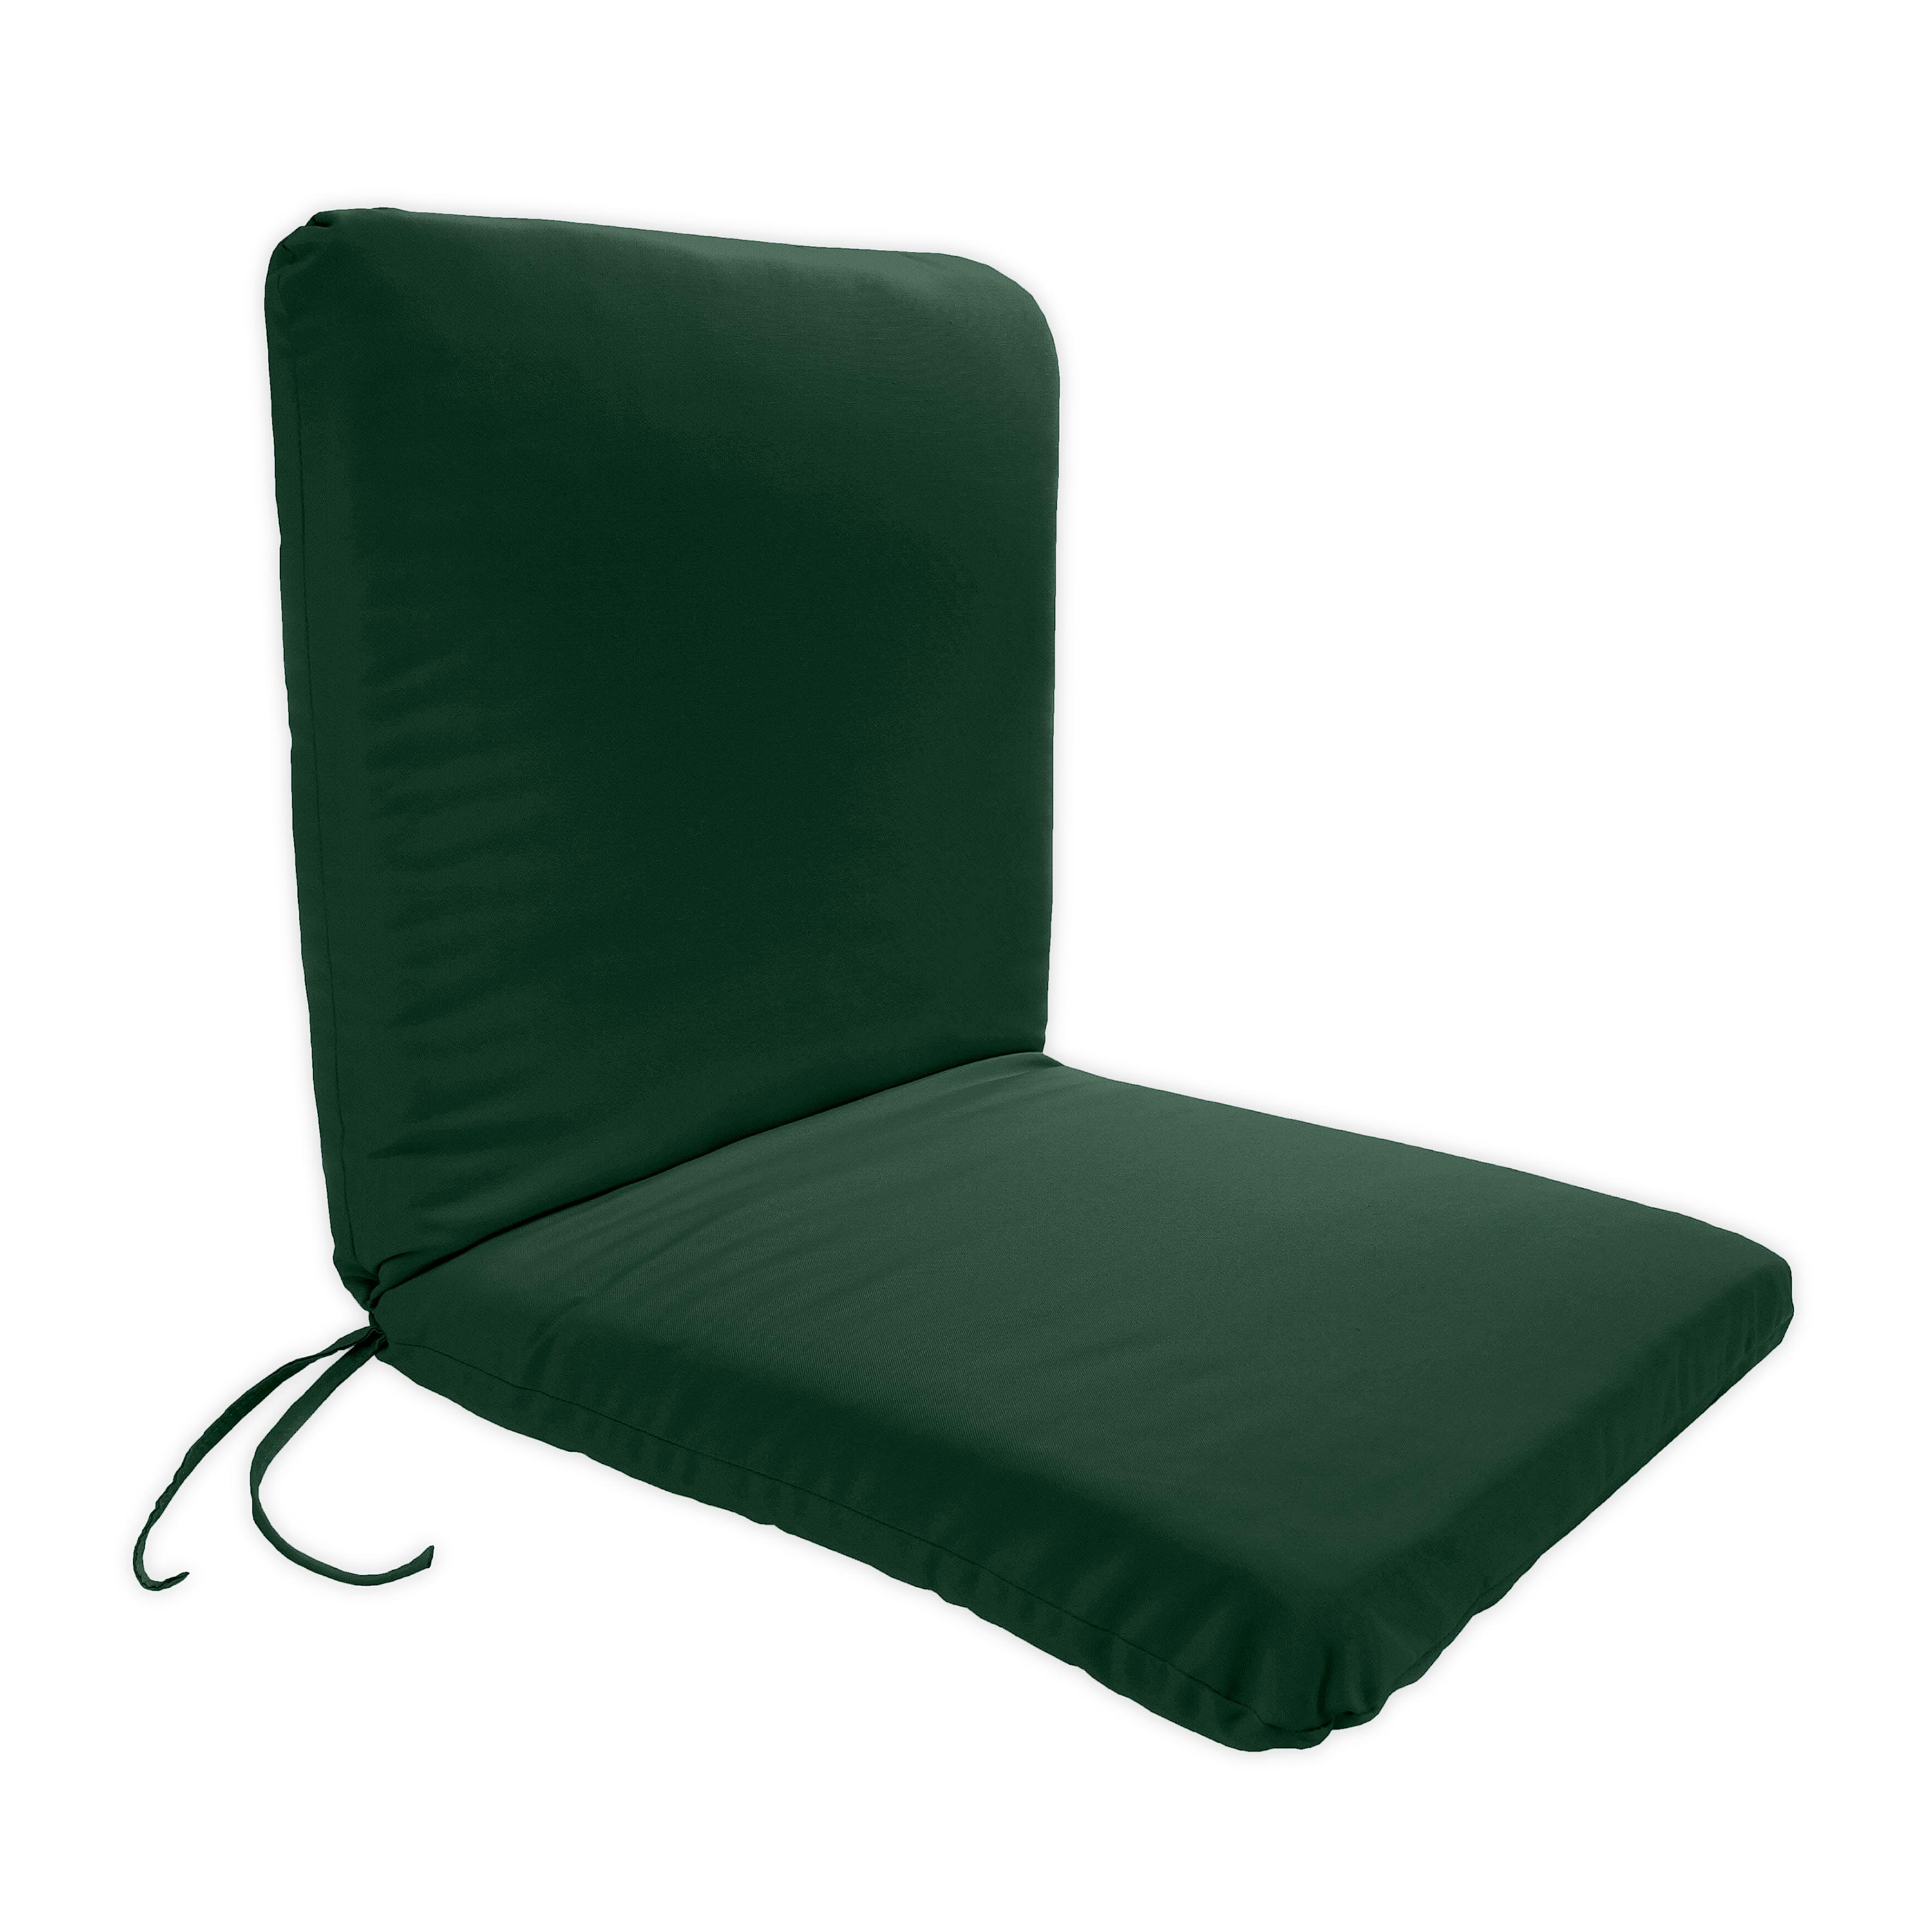 Classic Chair Cushion w/Ties, 19" x 17" x 2 1/2", Forest Green